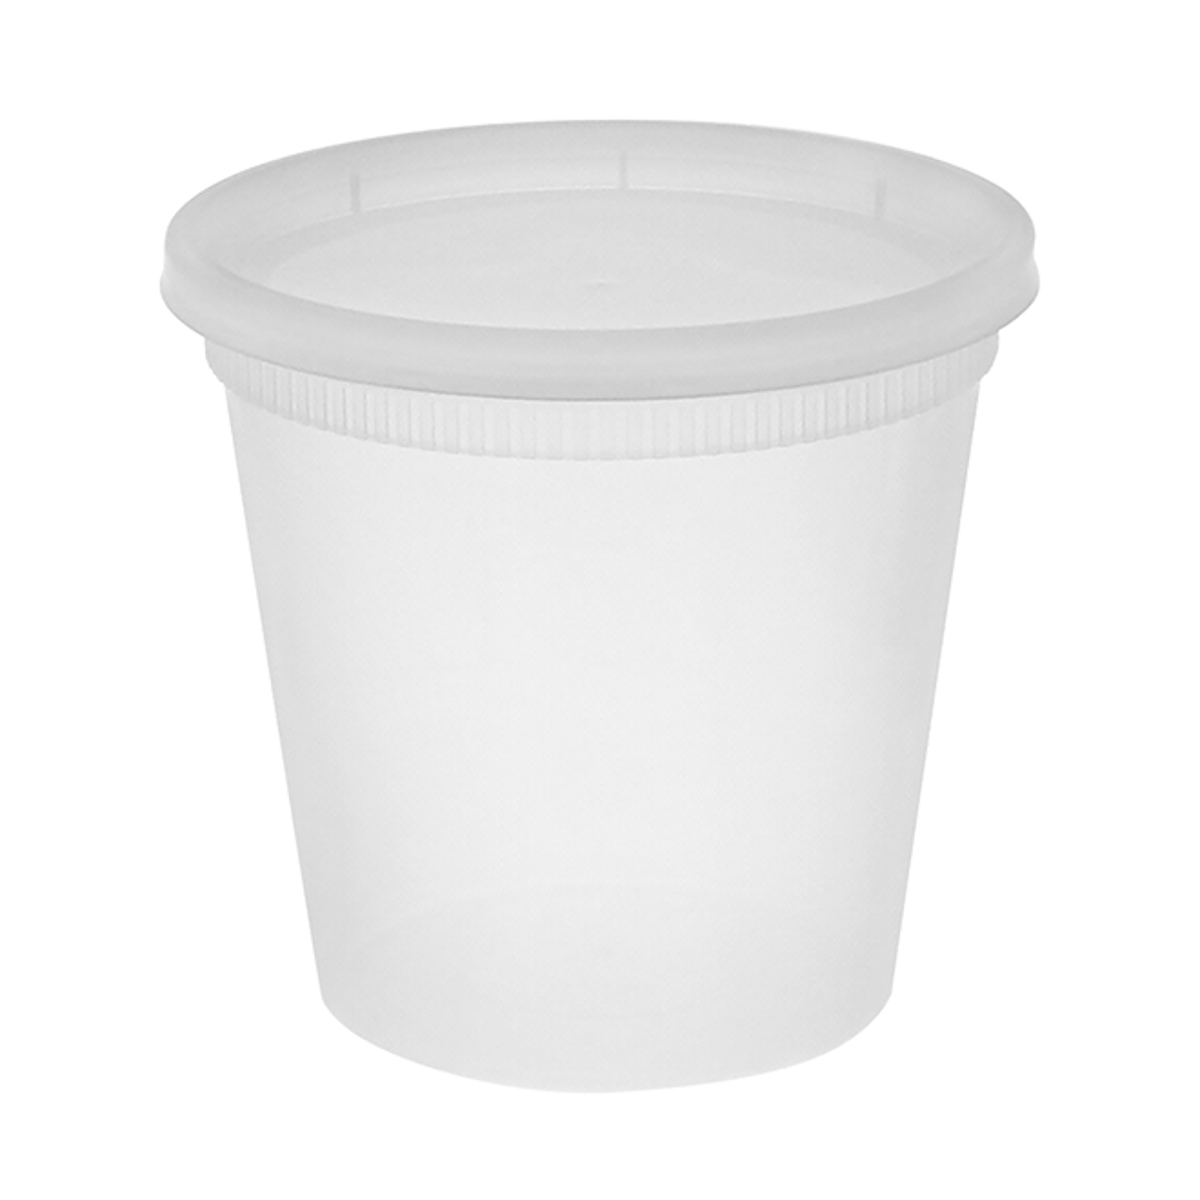 Plastic Deli Cup and Lid - 8 oz - 240 Qty – Bakers Authority